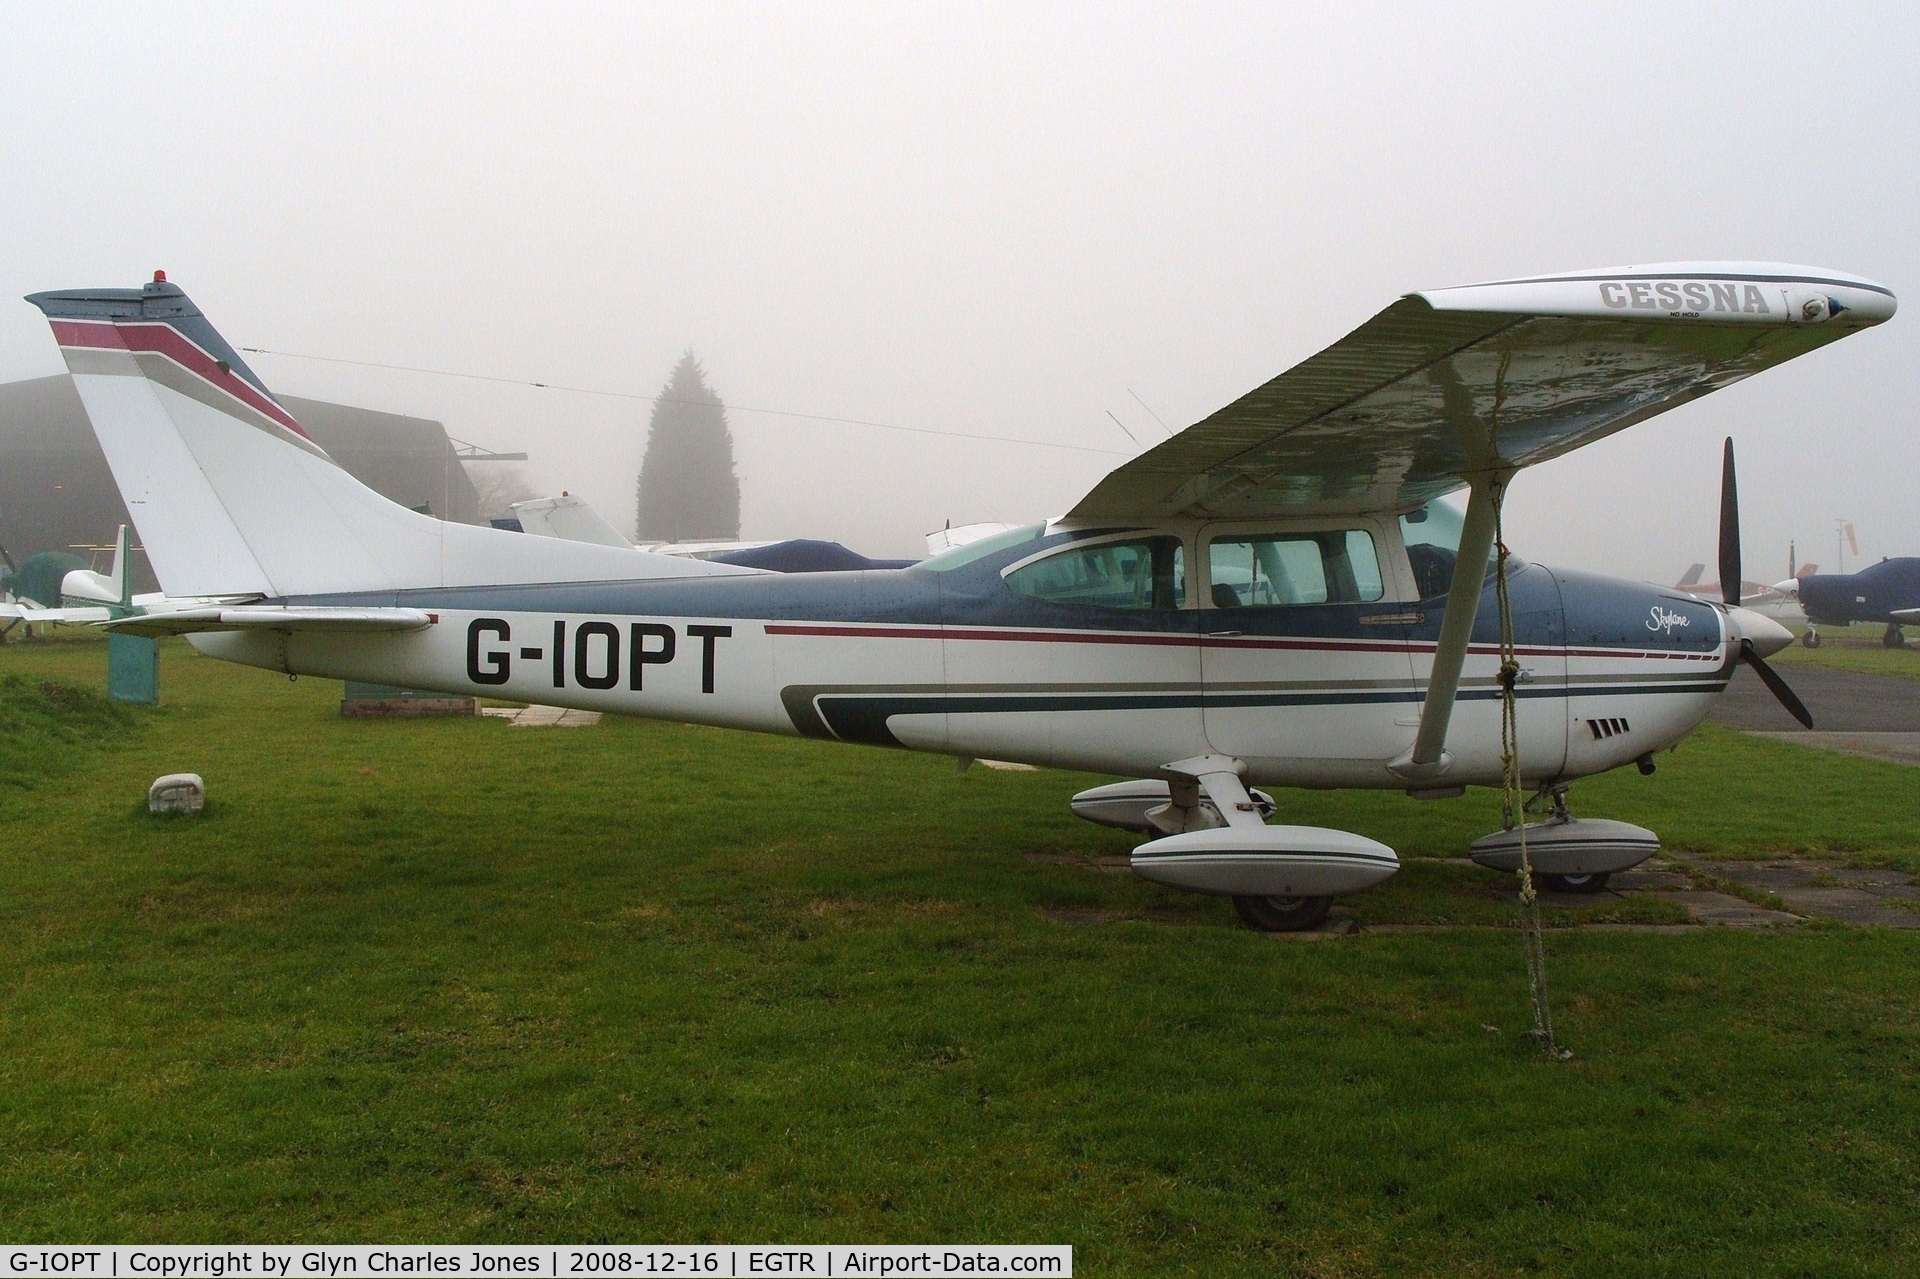 G-IOPT, 1973 Cessna 182P Skylane C/N 18261731, Taken on a quiet cold and foggy day. With thanks to Elstree control tower who granted me authority to take photographs on the aerodrome. Previously N21585, D-ECVM and N182EE. Owned by Indy Oscar Group.